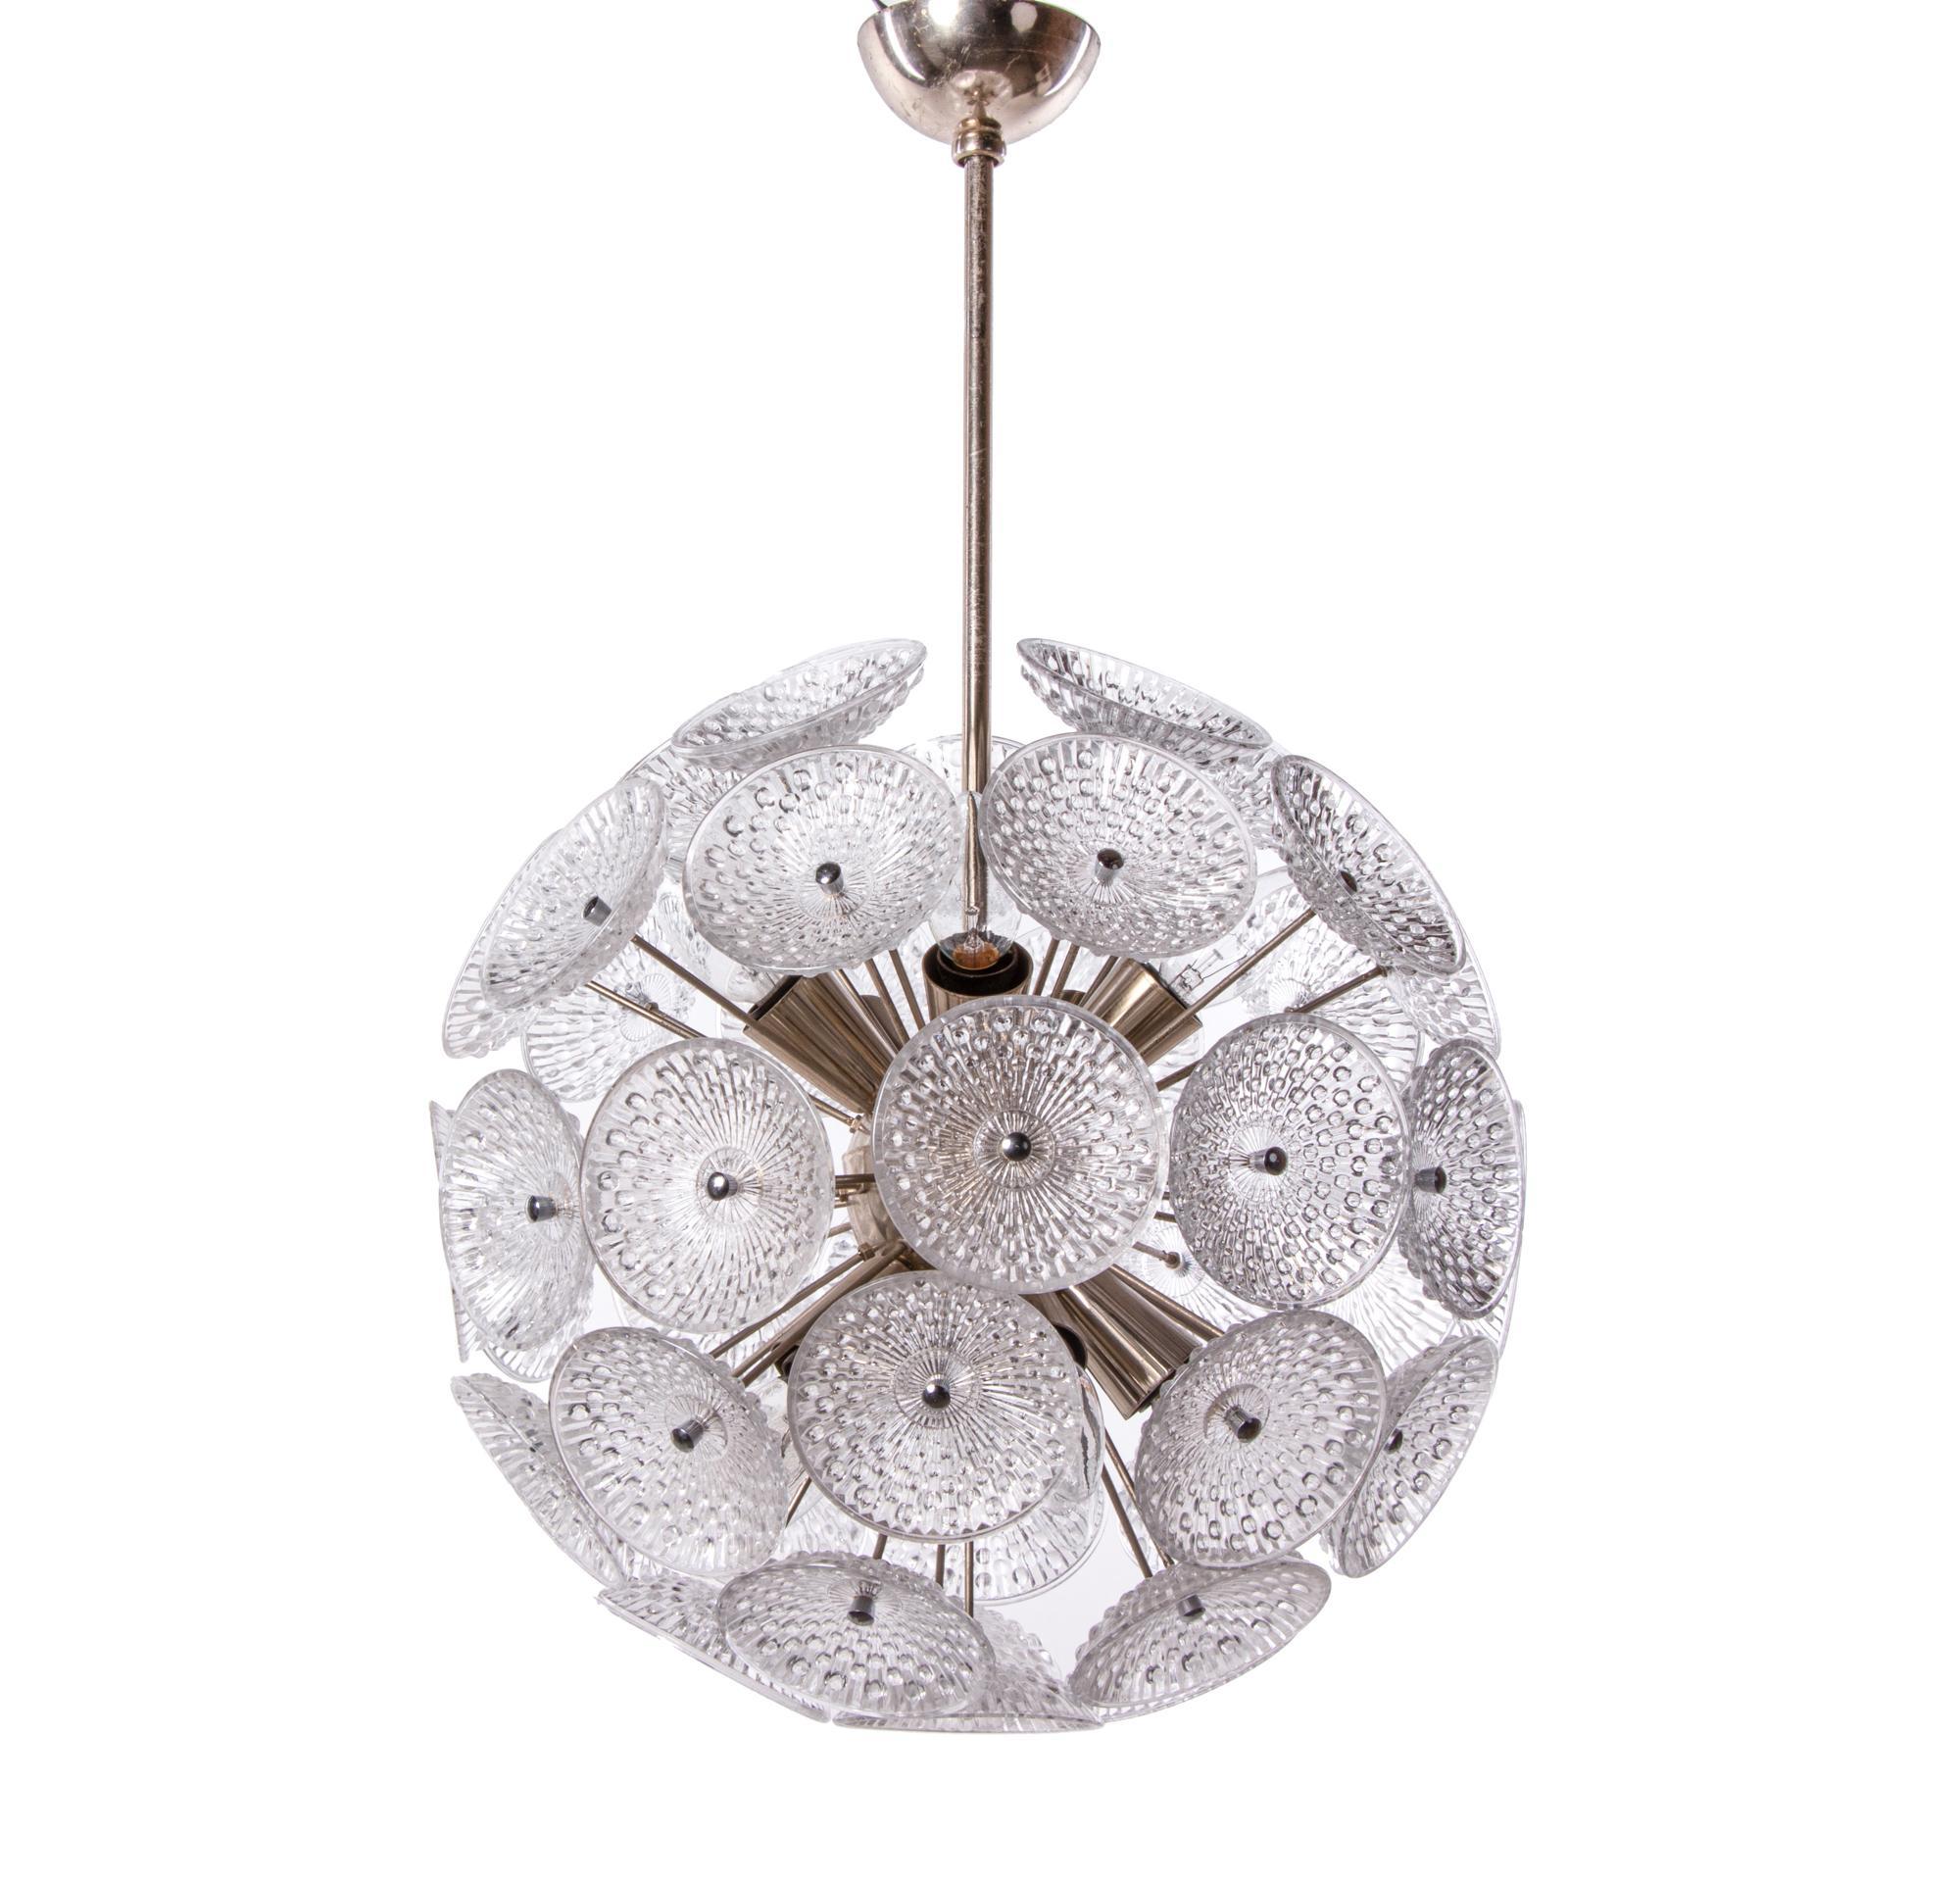 Elegant sputnik chandelier with dandelion glass flowers on a chromed brass frame. Chandelier illuminates beautifully and offers a lot of light. Gem from the time. With this light you make a clear statement in your interior design. A real eye-catcher